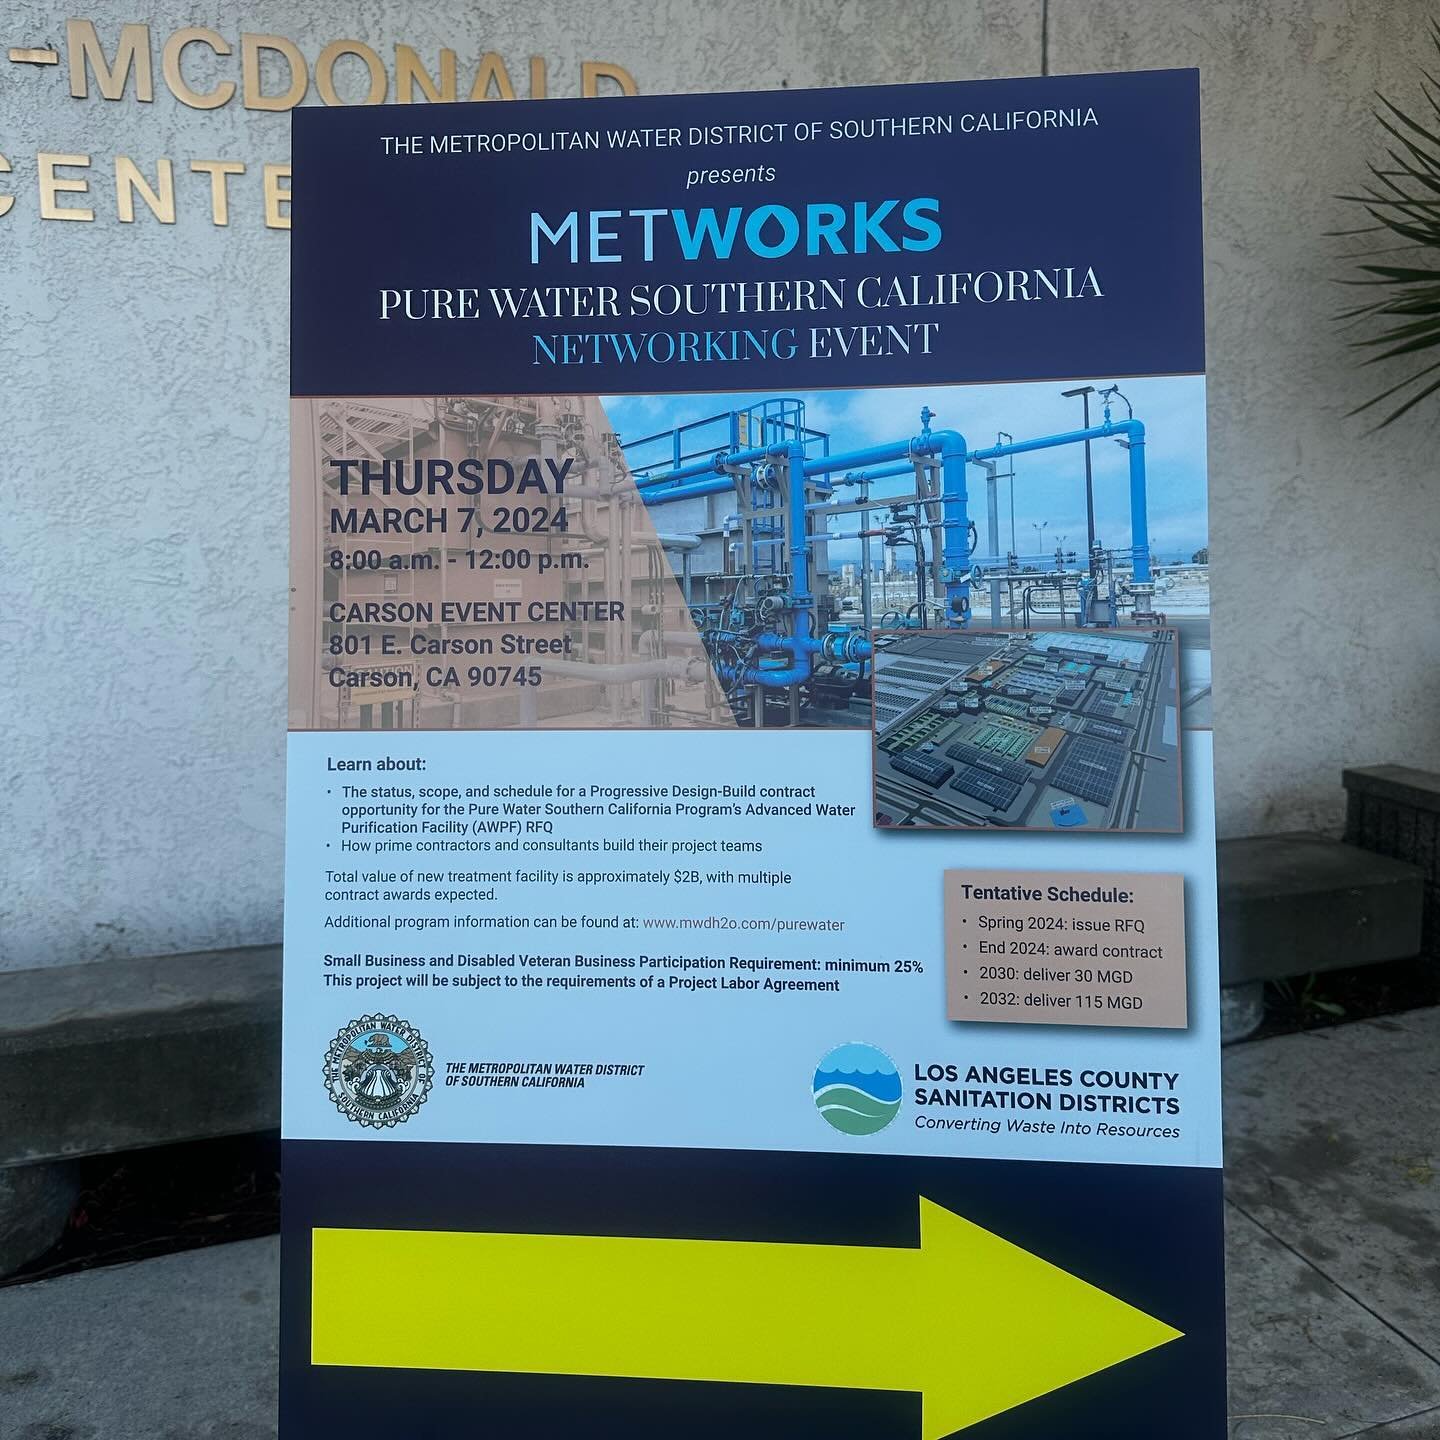 Thank you @mwdh2o for hosting the Pure Water Southern California Networking event in Carson last week. We had a great time meeting industry professionals, leaders and even competitors.

We are excited to learn about our new opportunities as a Small B